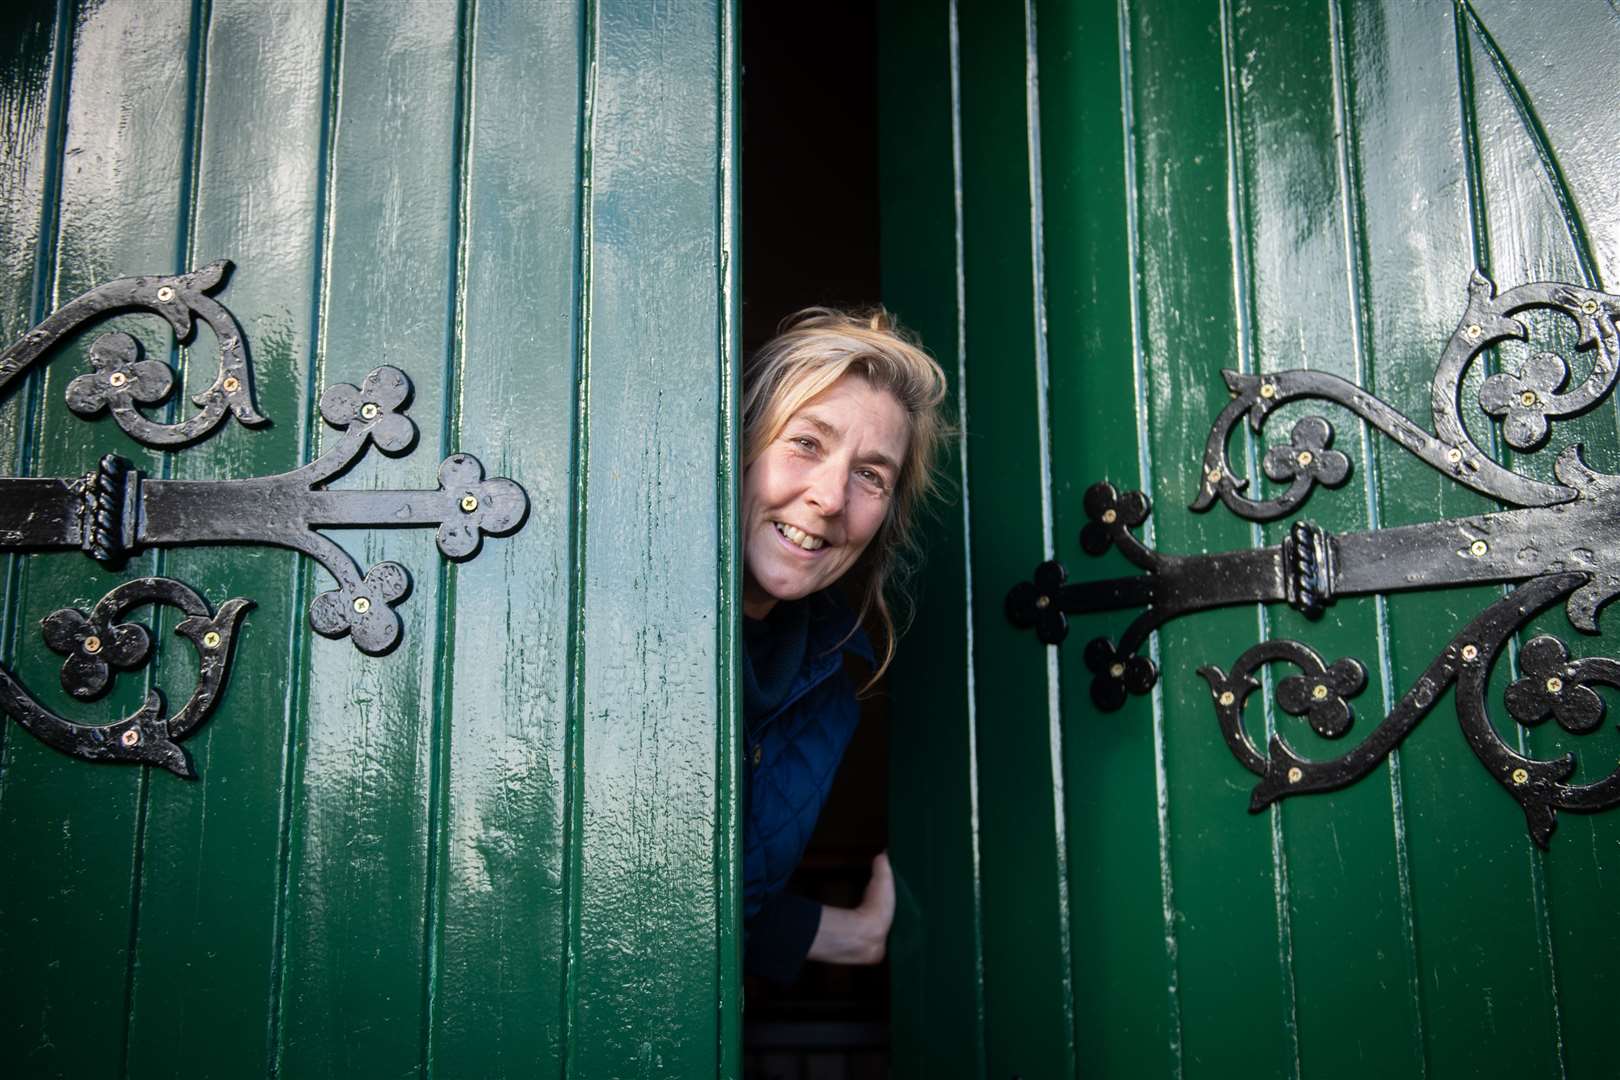 Hilary Andexer intends the church to remain a vibrant community hub. Picture: Callum Mackay